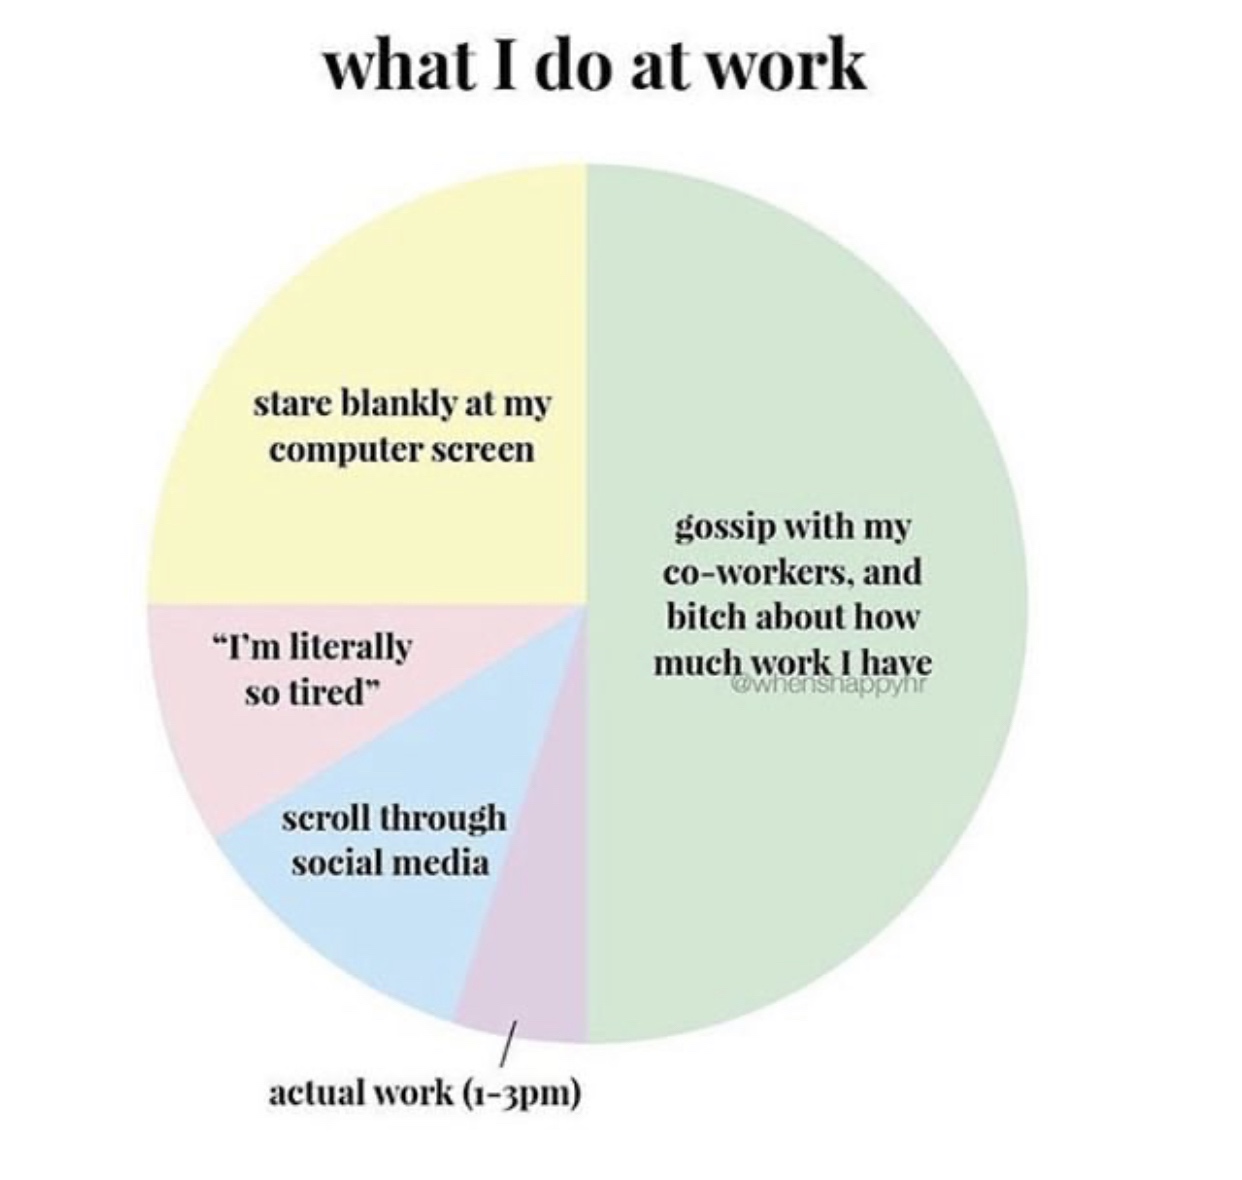 diagram - what I do at work stare blankly at my computer screen gossip with my coworkers, and bitch about how much work I have "I'm literally so tired" whenshappyhr scroll through social media actual work 13pm